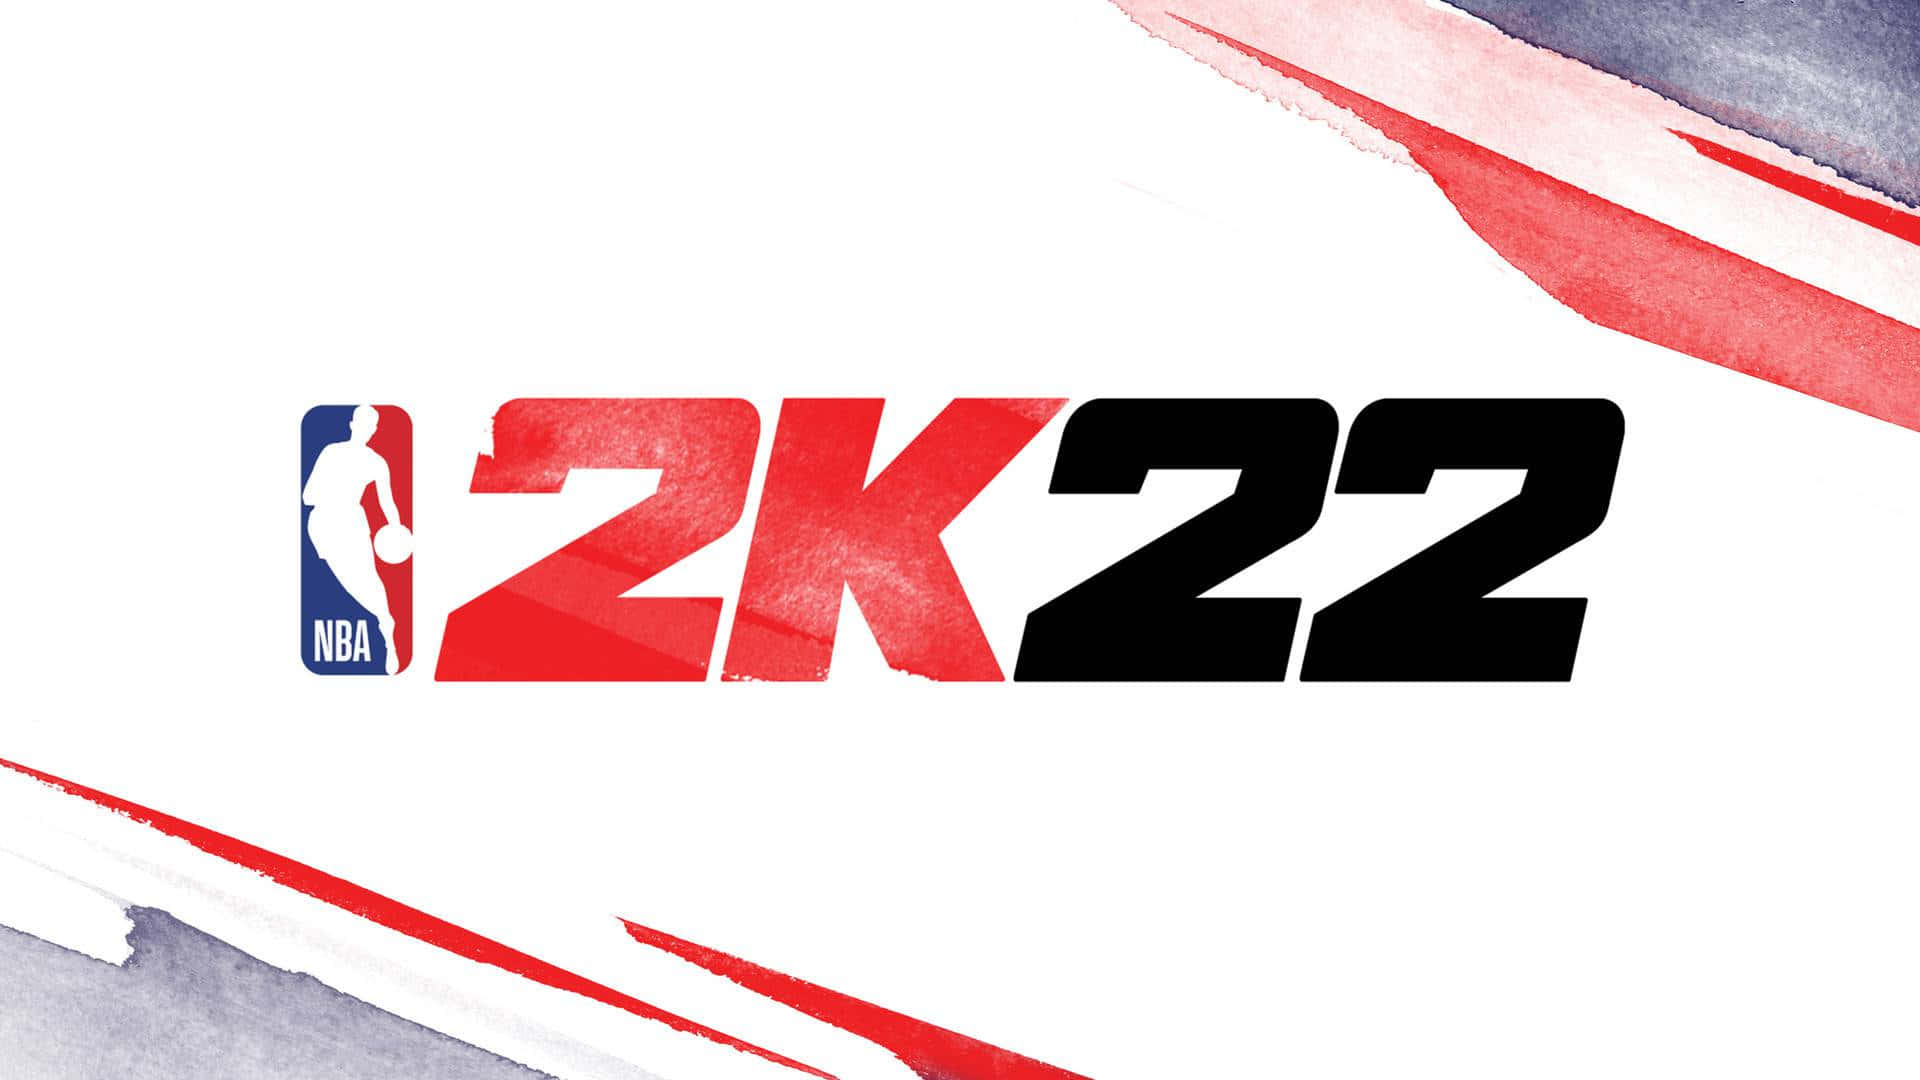 Unlock the best basketball experience in the world with NBA 2K22! Wallpaper